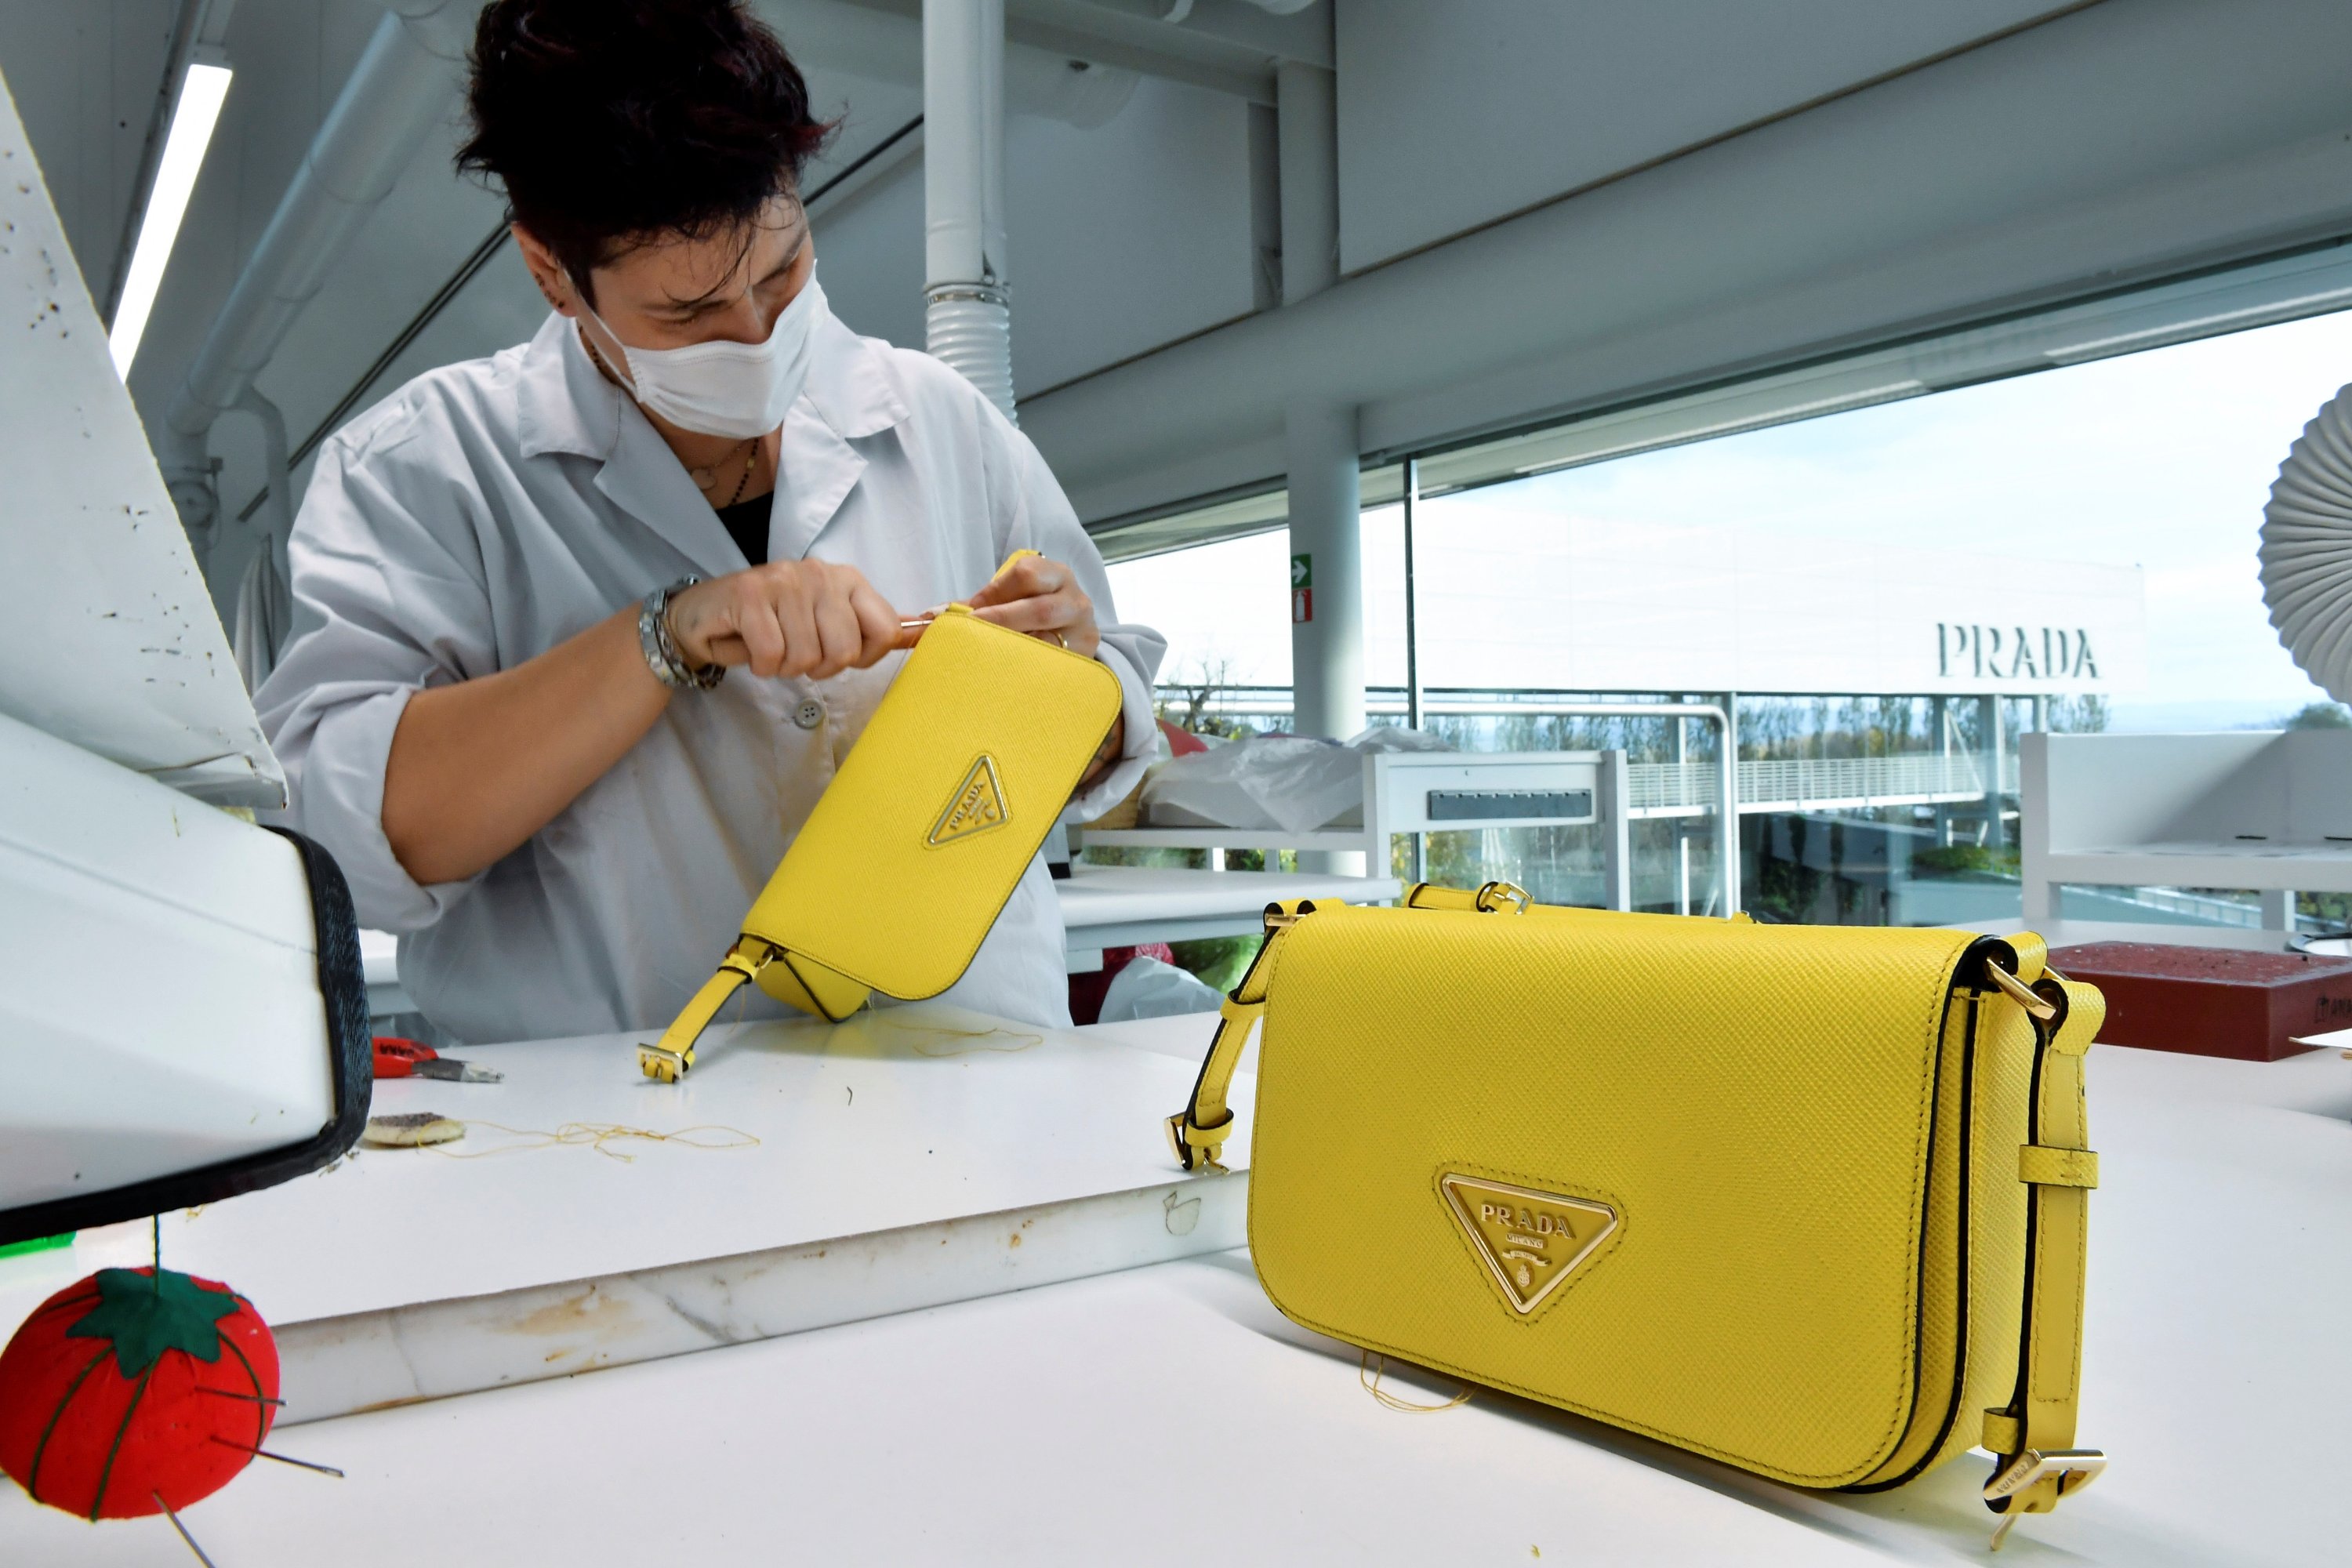 Prada sees opportunity in booming second-hand fashion sector | Daily Sabah